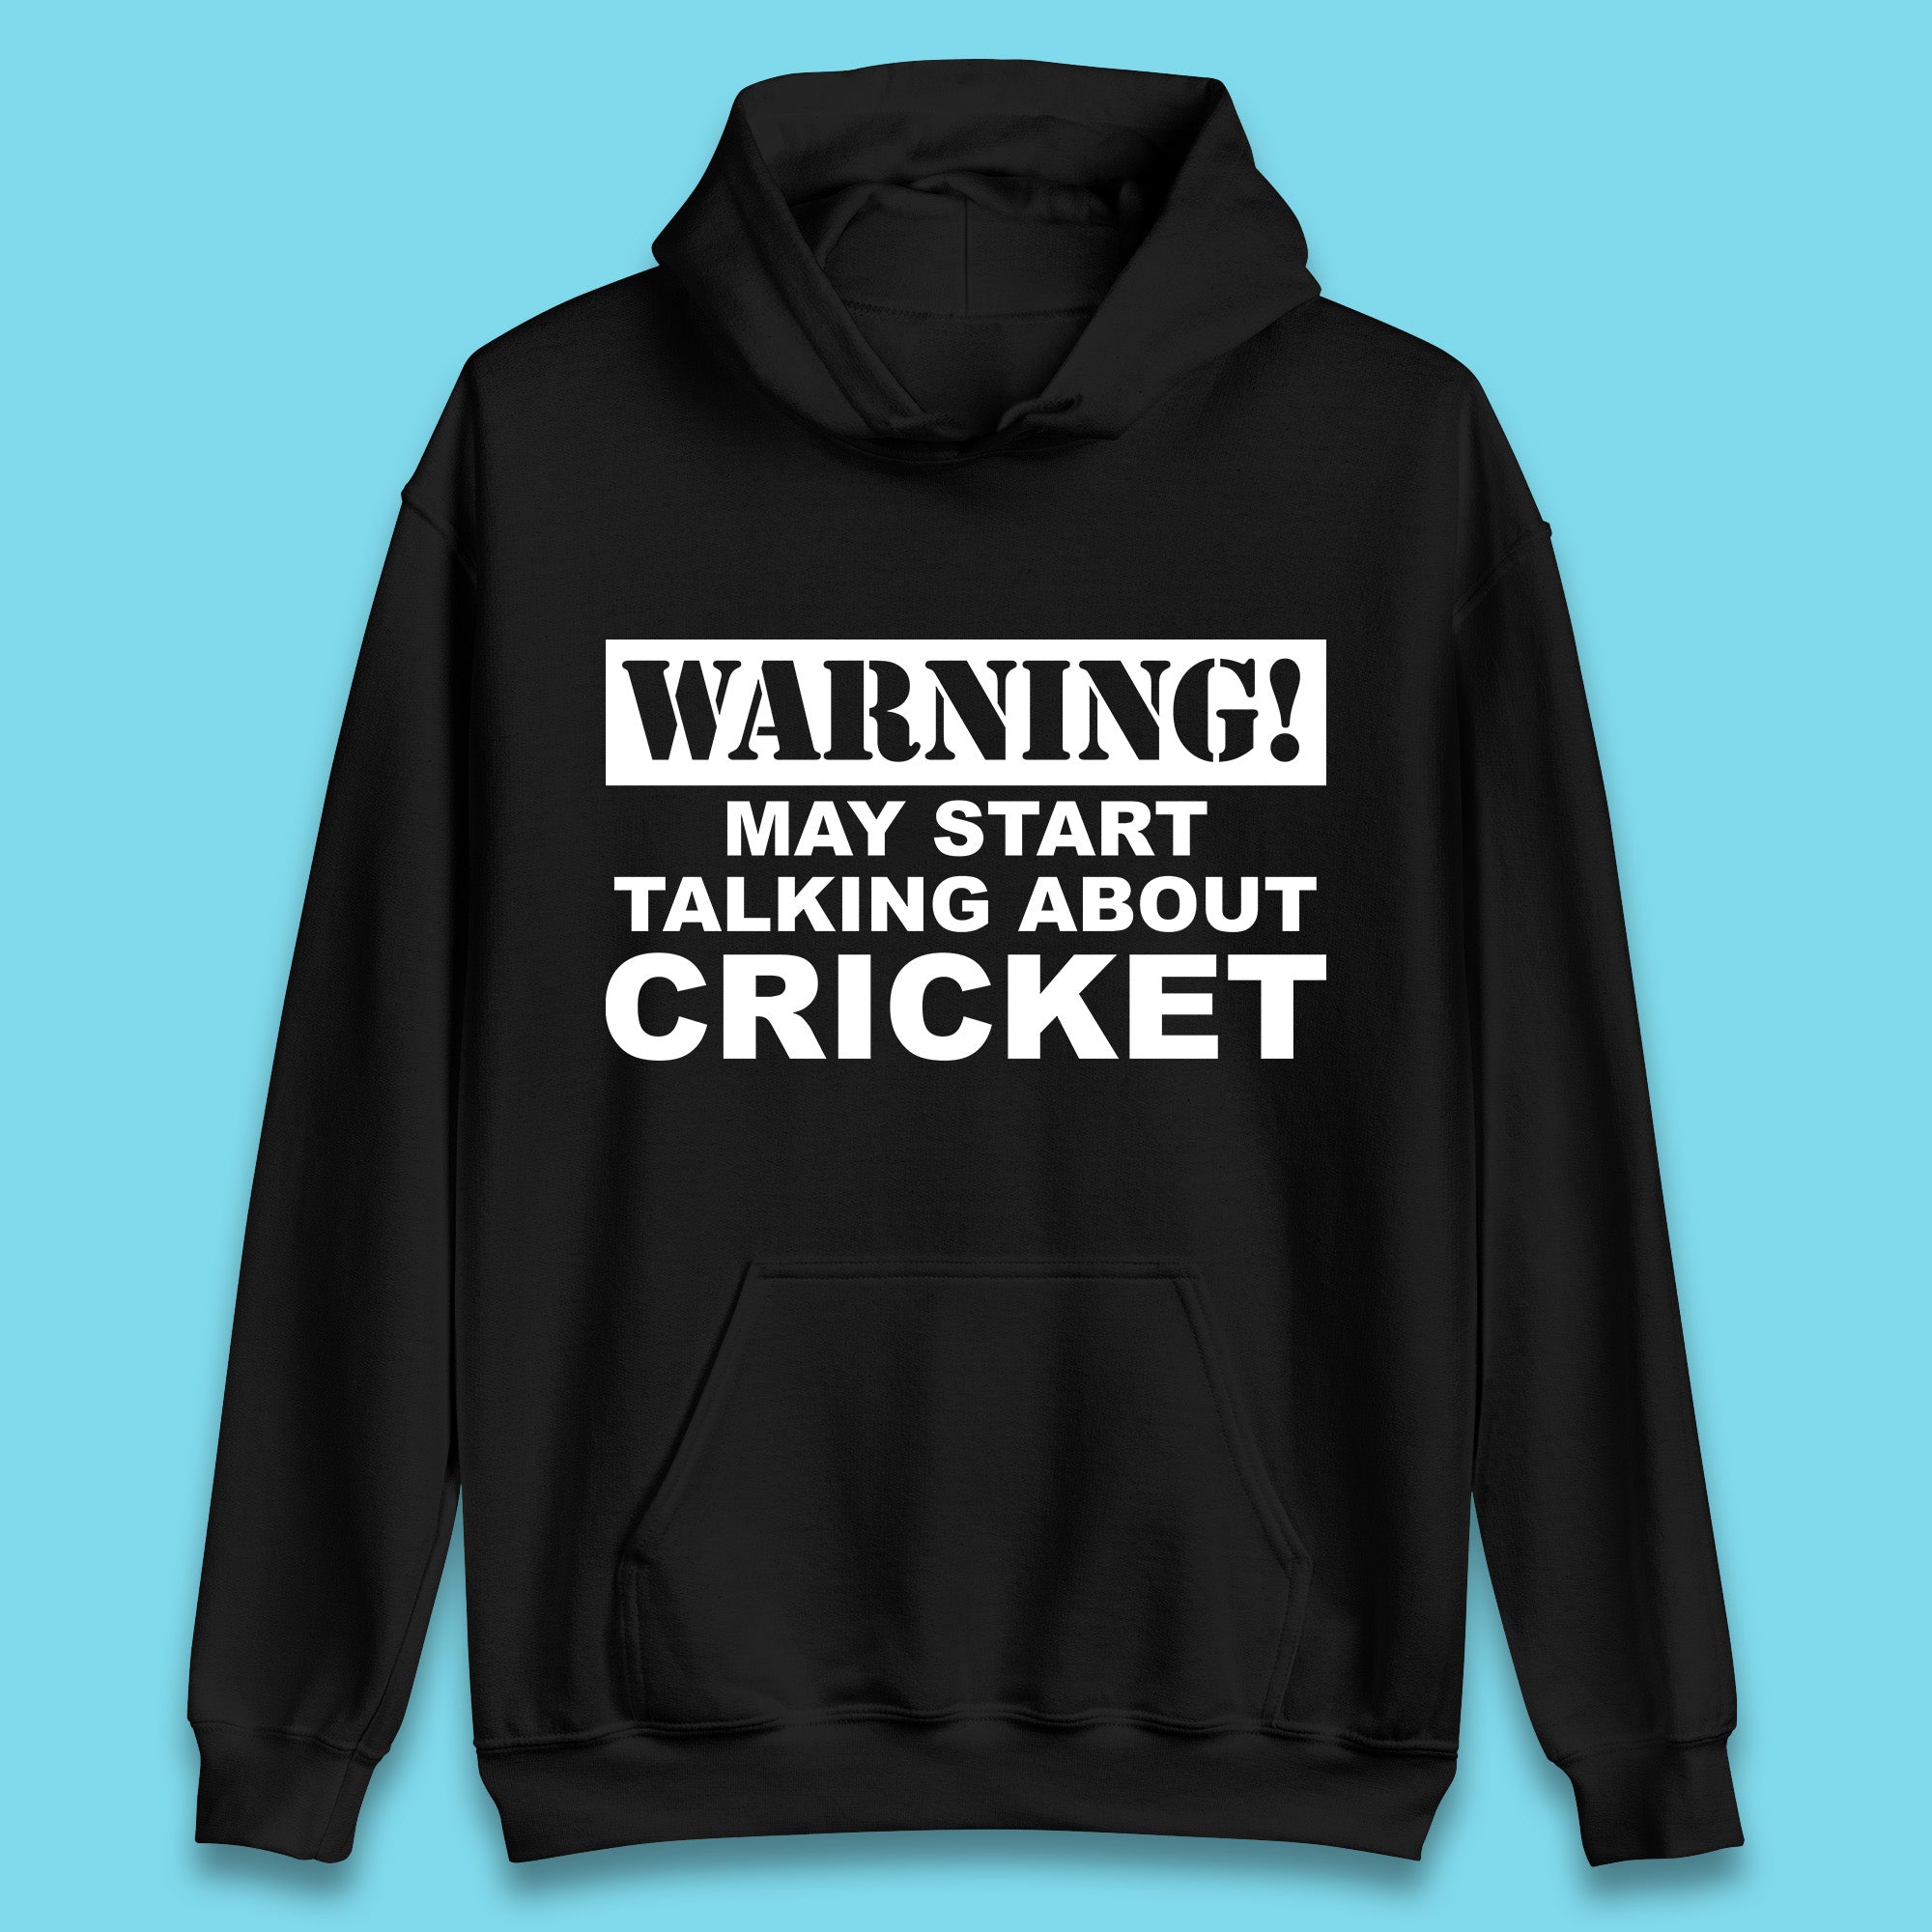 Warning May Start Talking About Cricket Funny Novelty Cricket Saying Gift Unisex Hoodie